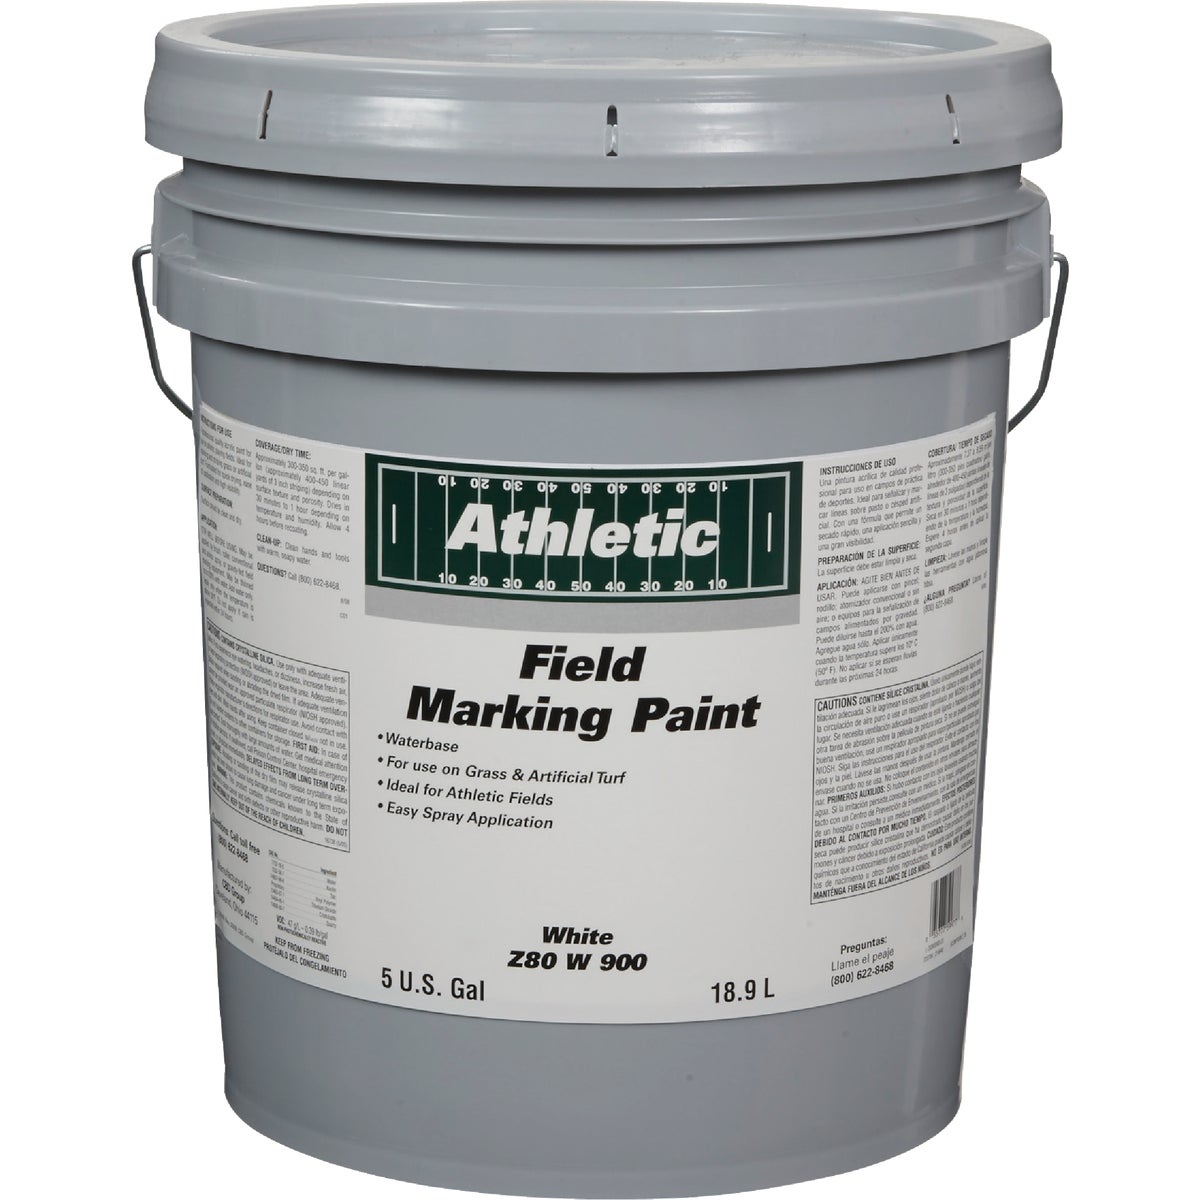 Item 779890, An acrylic flat athletic field marking paint designed as a system for use 